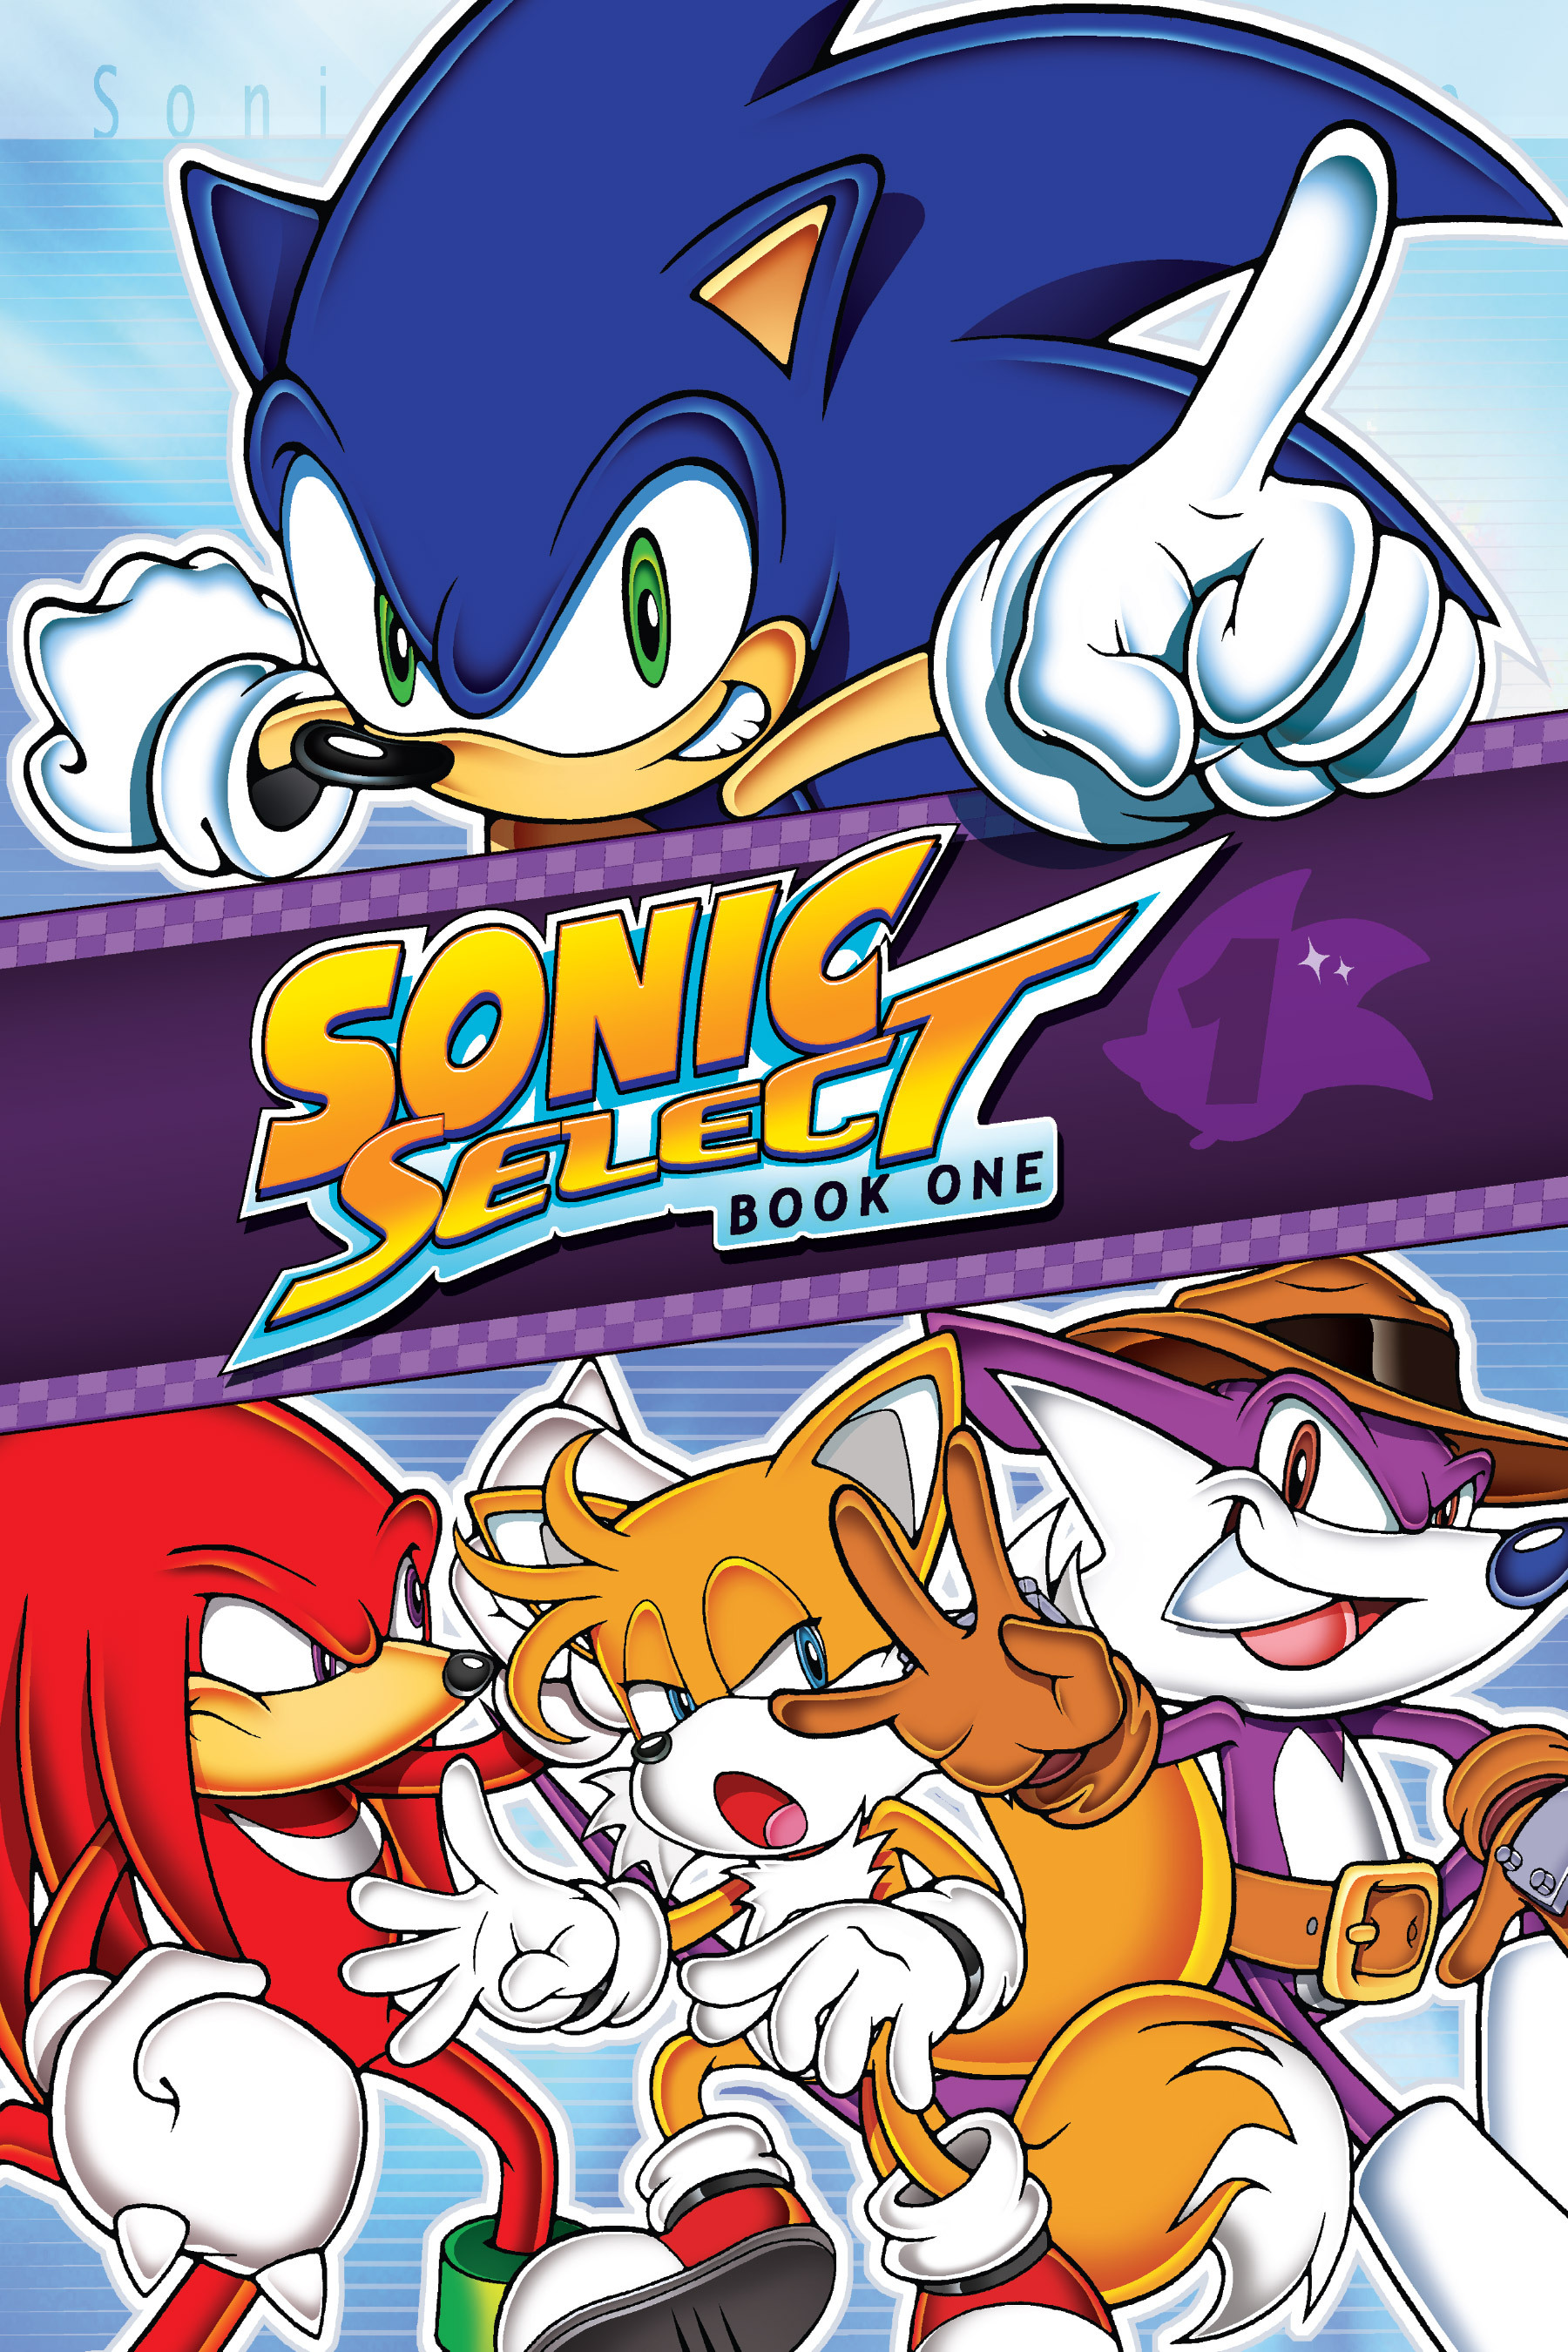 http://vignette1.wikia.nocookie.net/sonic/images/a/a4/Sonic_Select_1.jpg